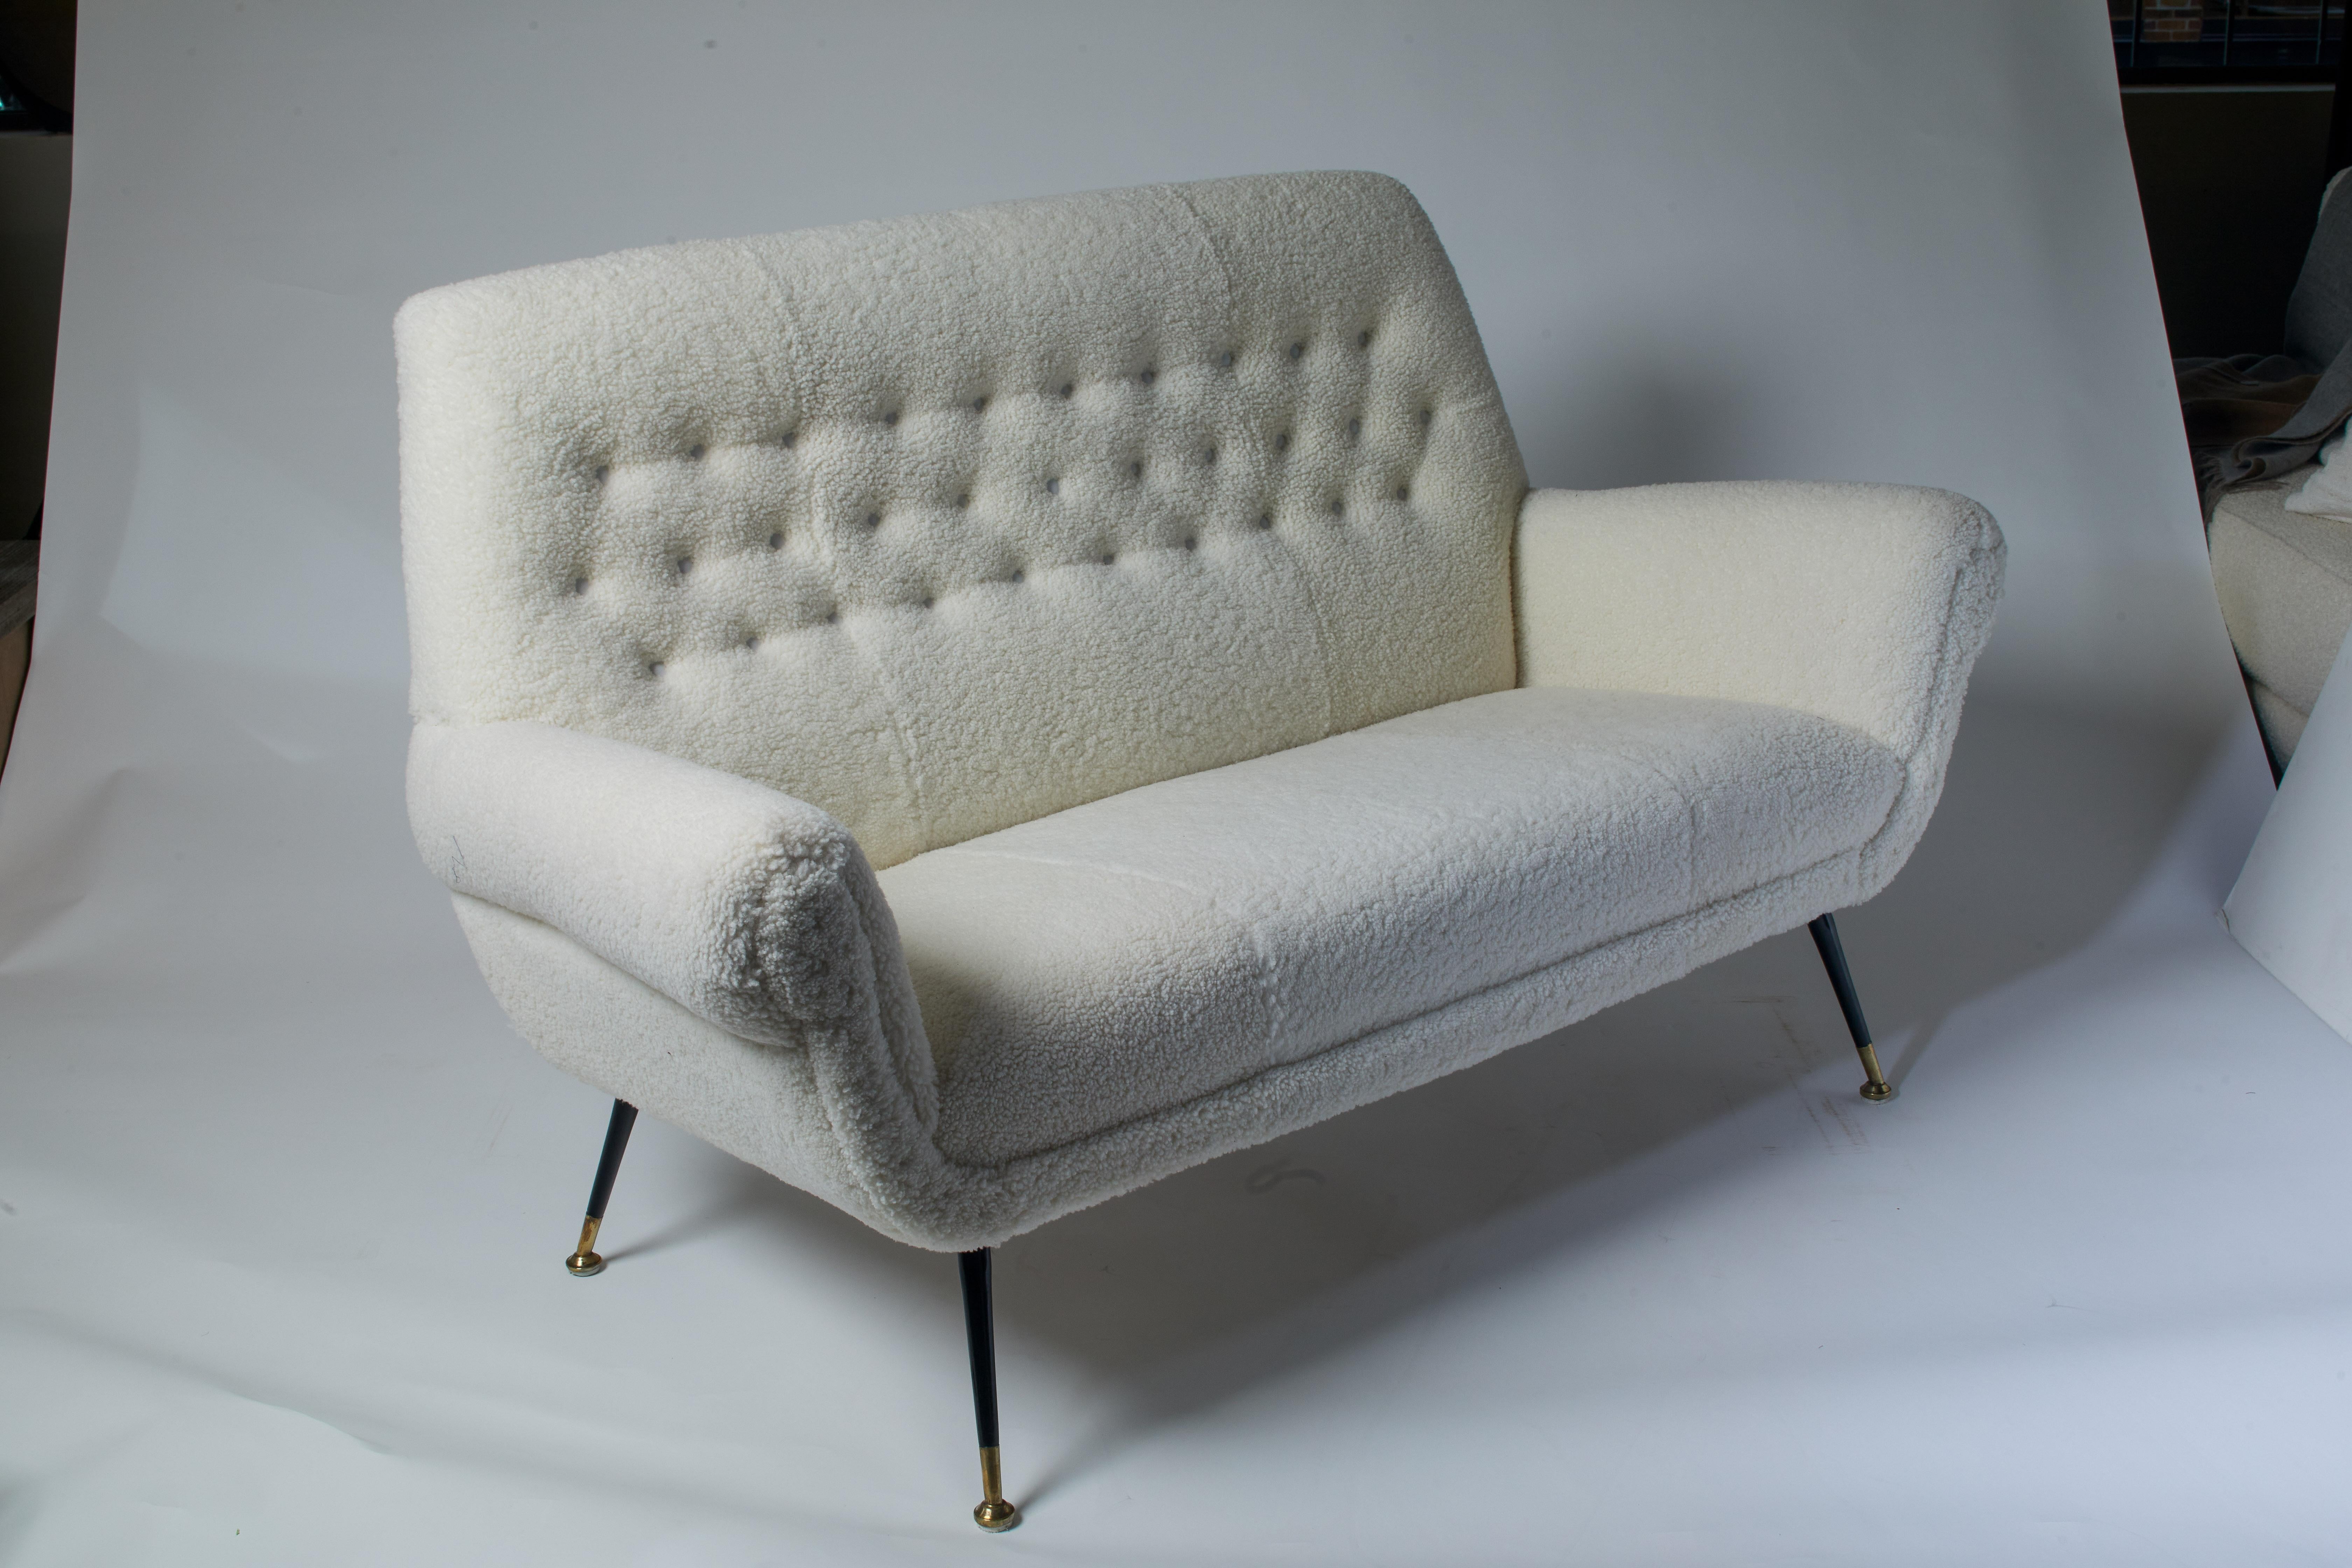 1970s Italian white curly shearling settee with metal legs, fully restored.